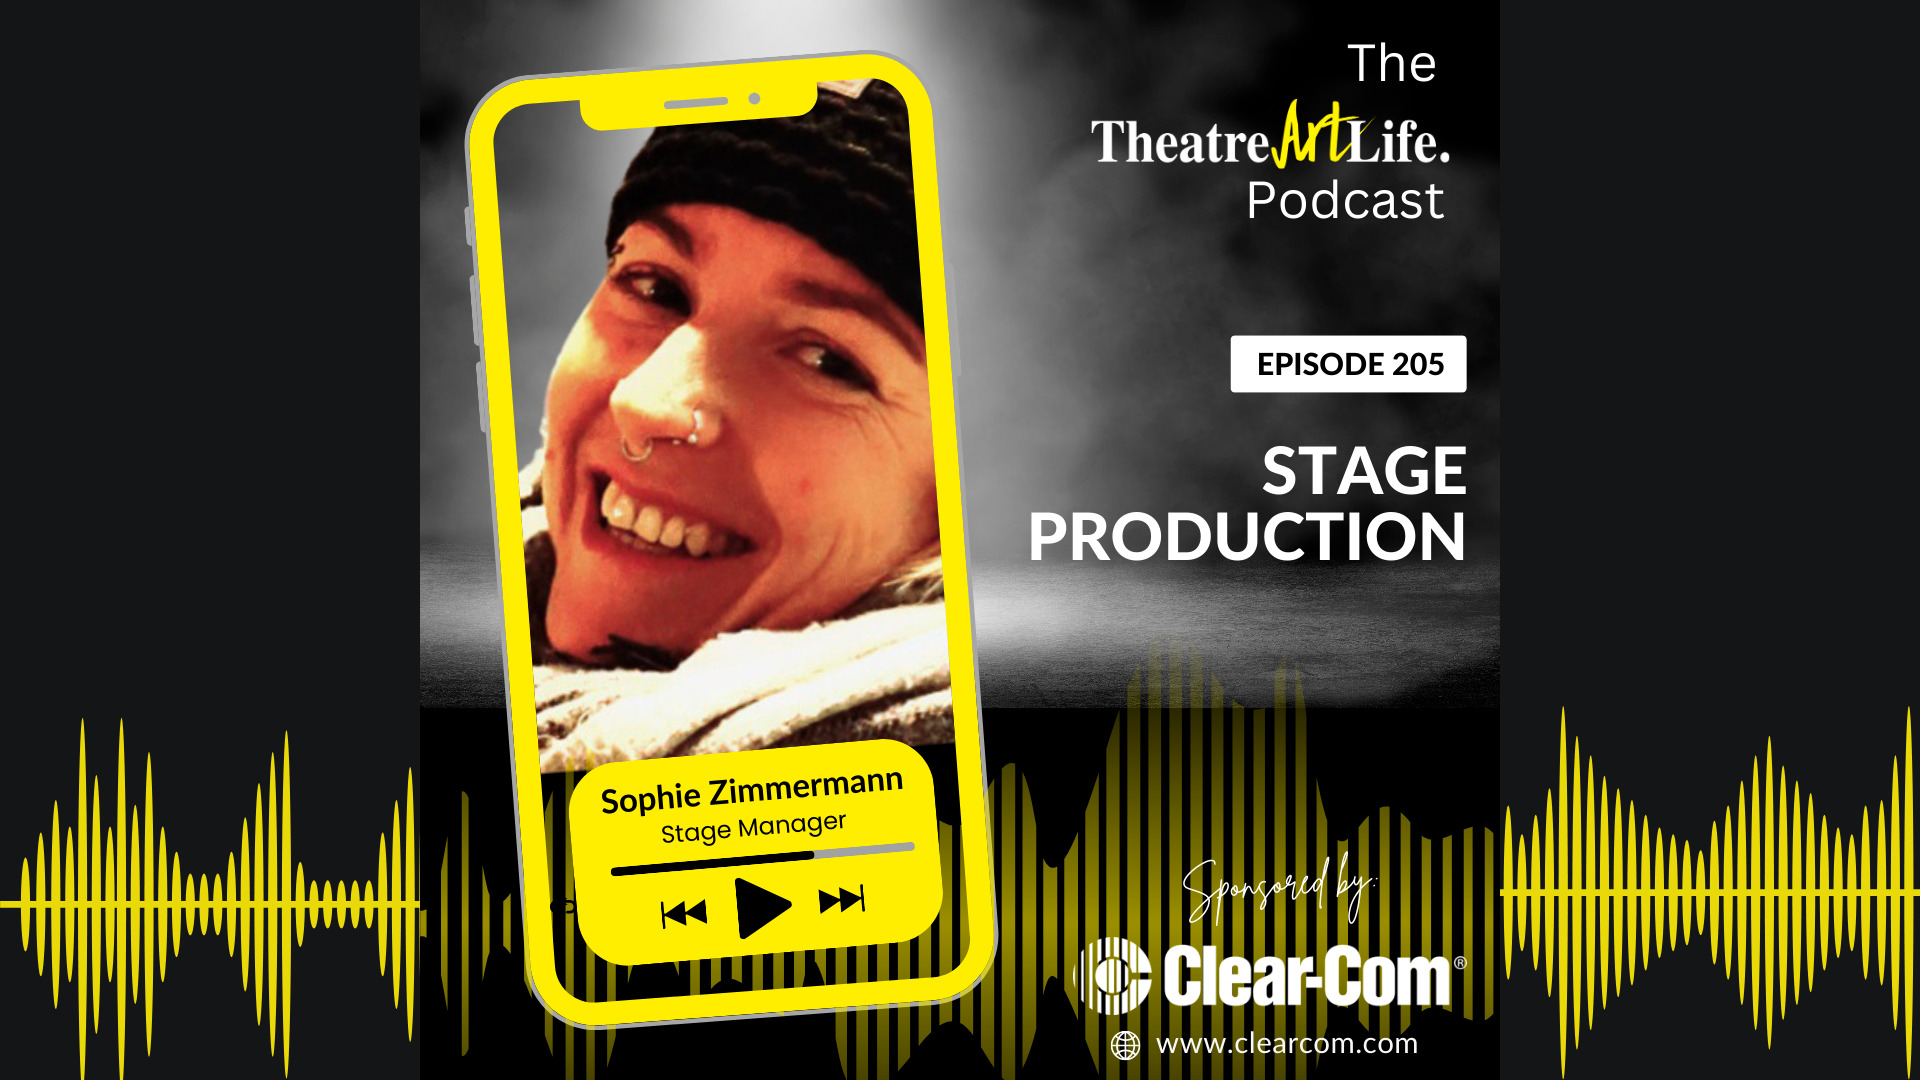 Theater Art Life Podcast – Stage Production with Sophie Zimmermann (Ep 205)